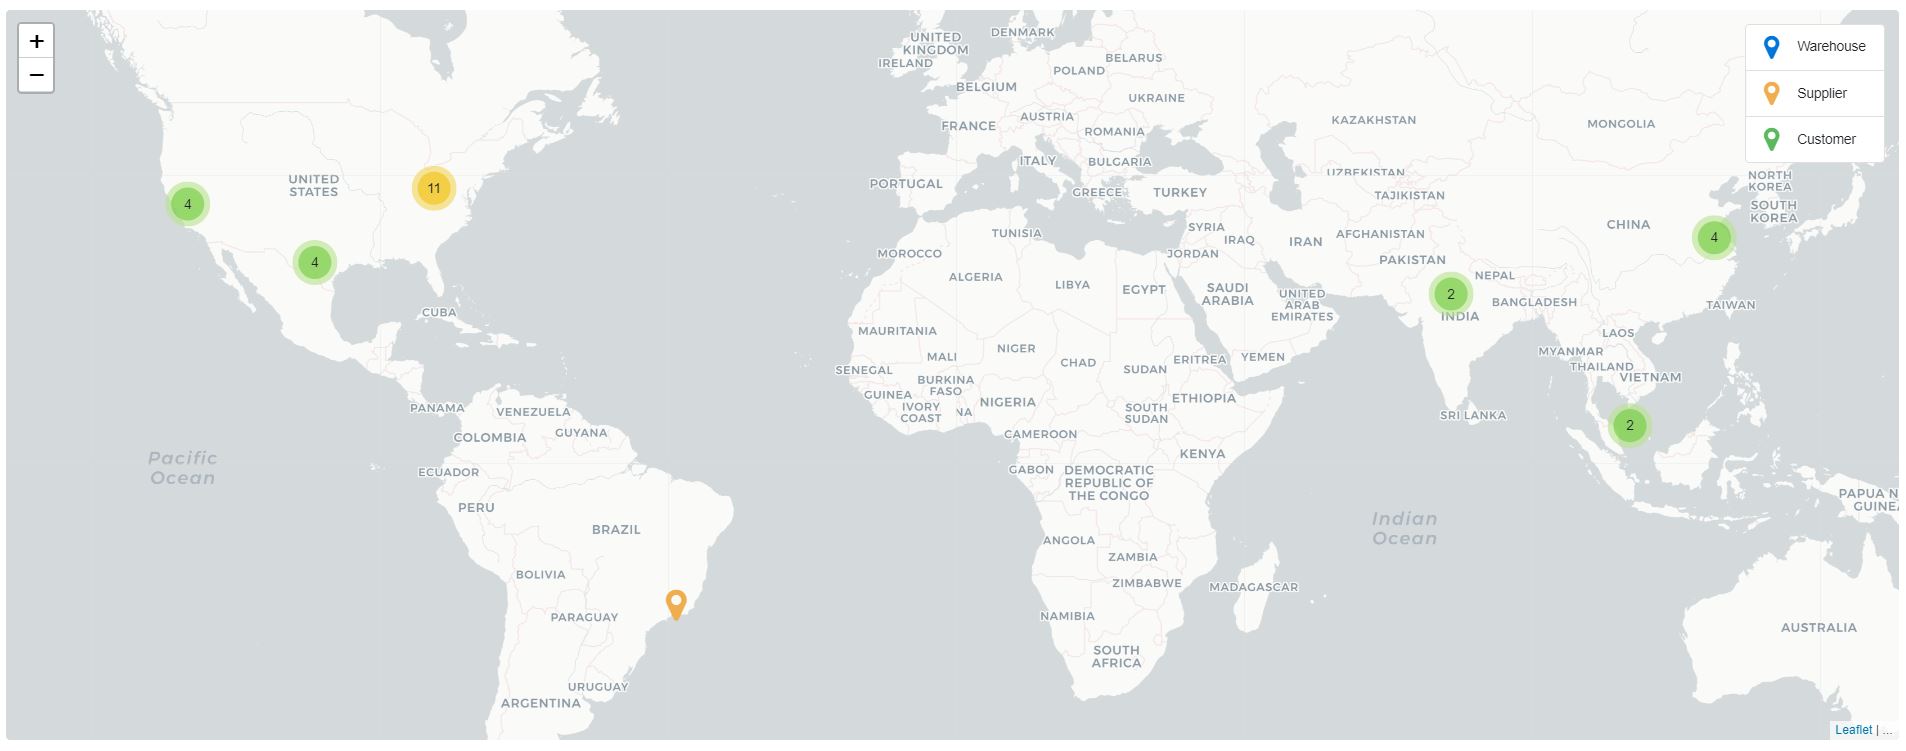 Visualize your customers, suppliers and supply chain nodes on a world map and quickly access the data you are looking for